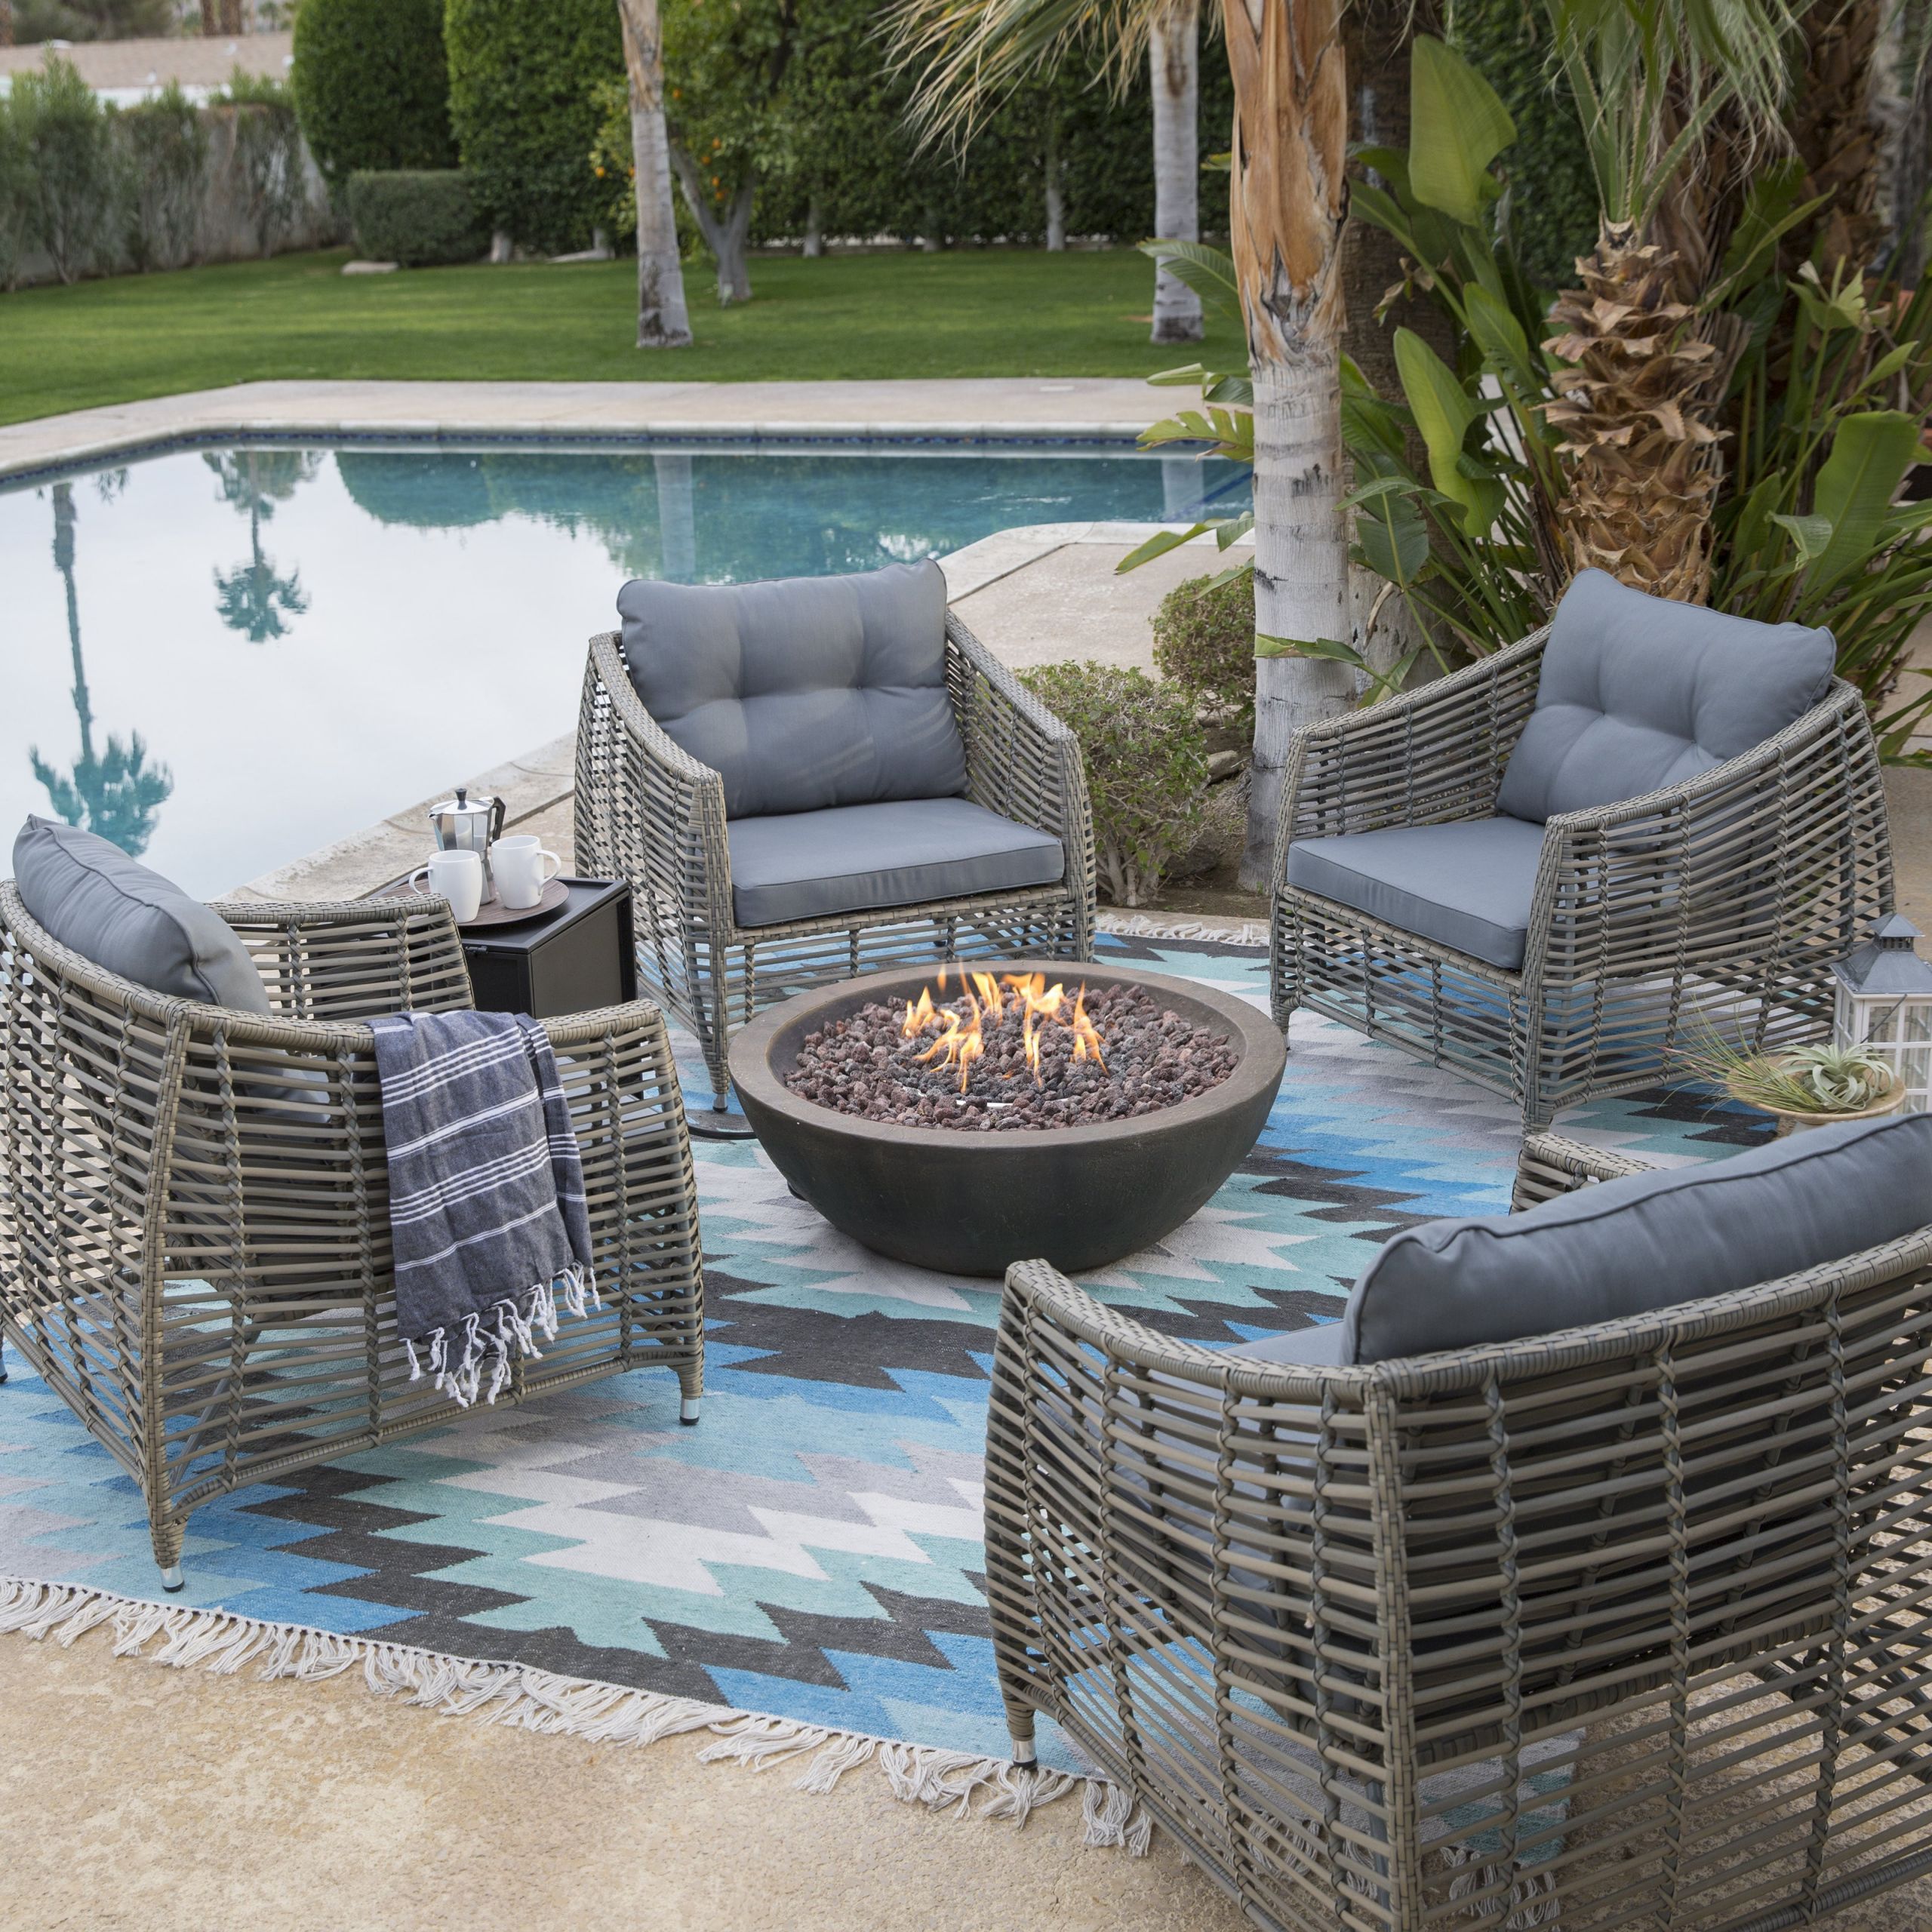 Patio Set With Fire Pit
 Belham Living Kambree Chat Set with Tucson Fire Pit Fire